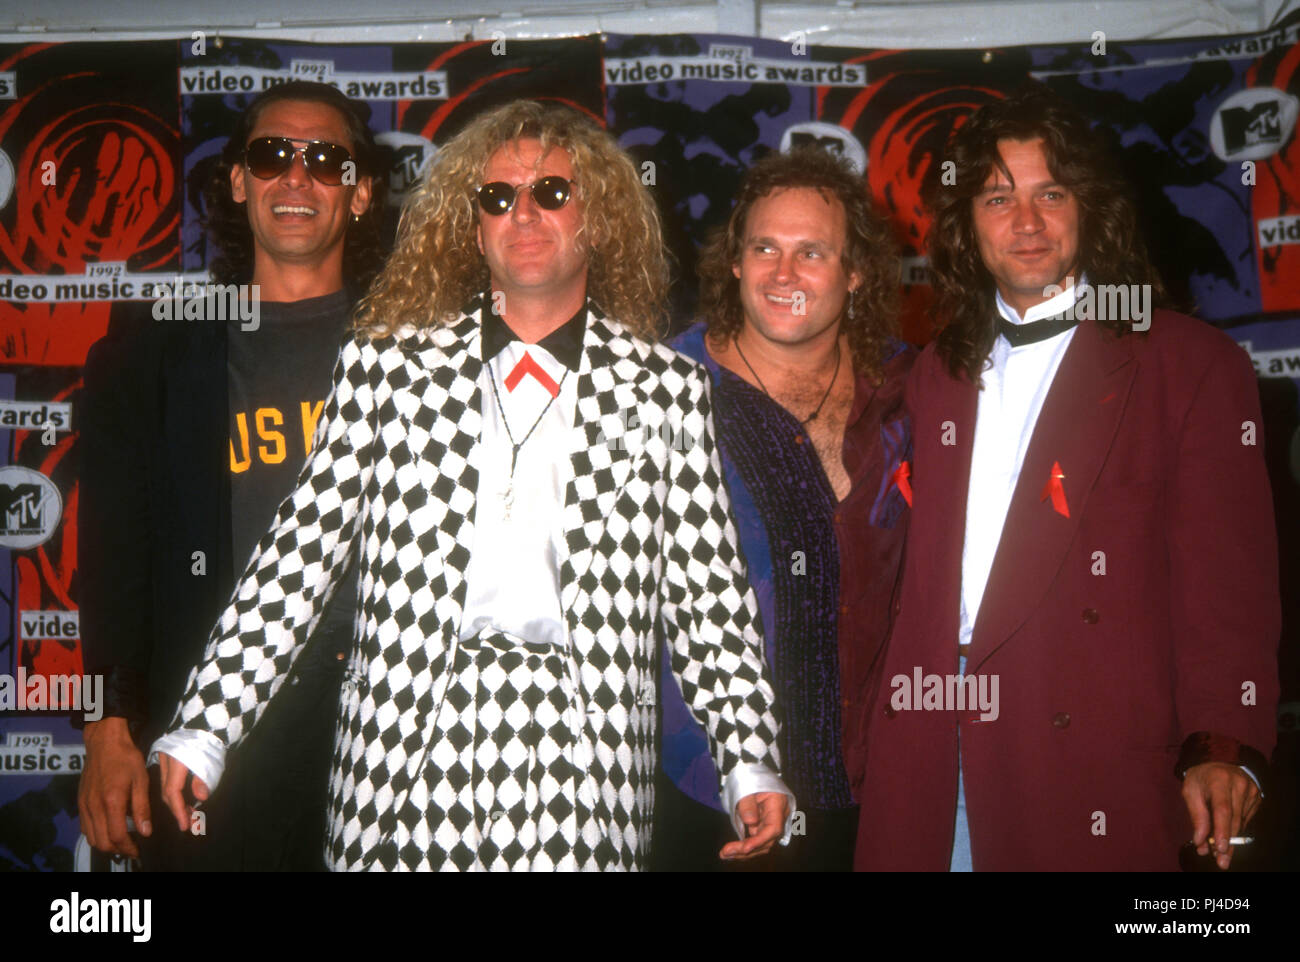 LOS ANGELES, CA - SEPTEMBER 9: (L-R) Musicians Alex Van Halen, Sammy Hagar, Michael Anthony and Eddie Van Halen of Van Halen attend the Ninth Annual MTV Video Music Awards on September 9, 1992 at Pauley Pavilion, UCLA in Westwood, Los Angeles, California. Photo by Barry King/Alamy Stock Photo Stock Photo